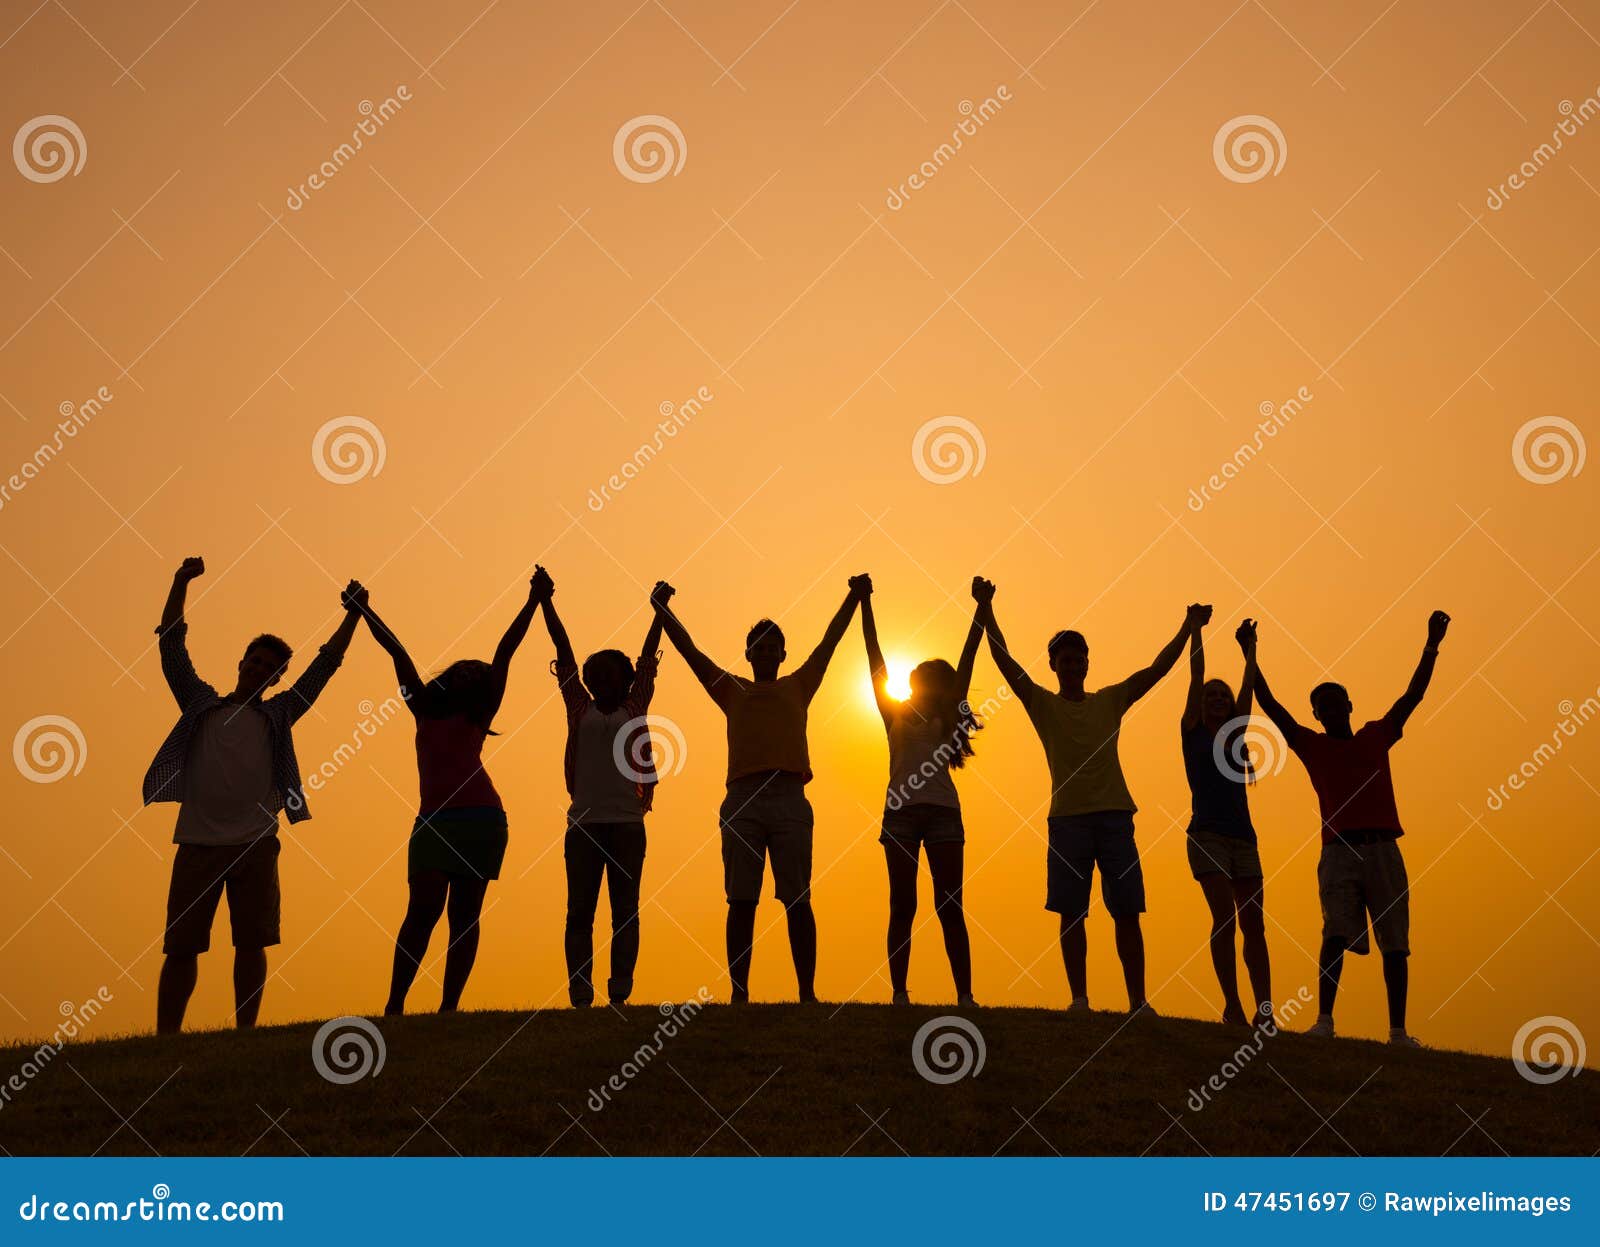 friendship people togetherness happiness outdoors concept